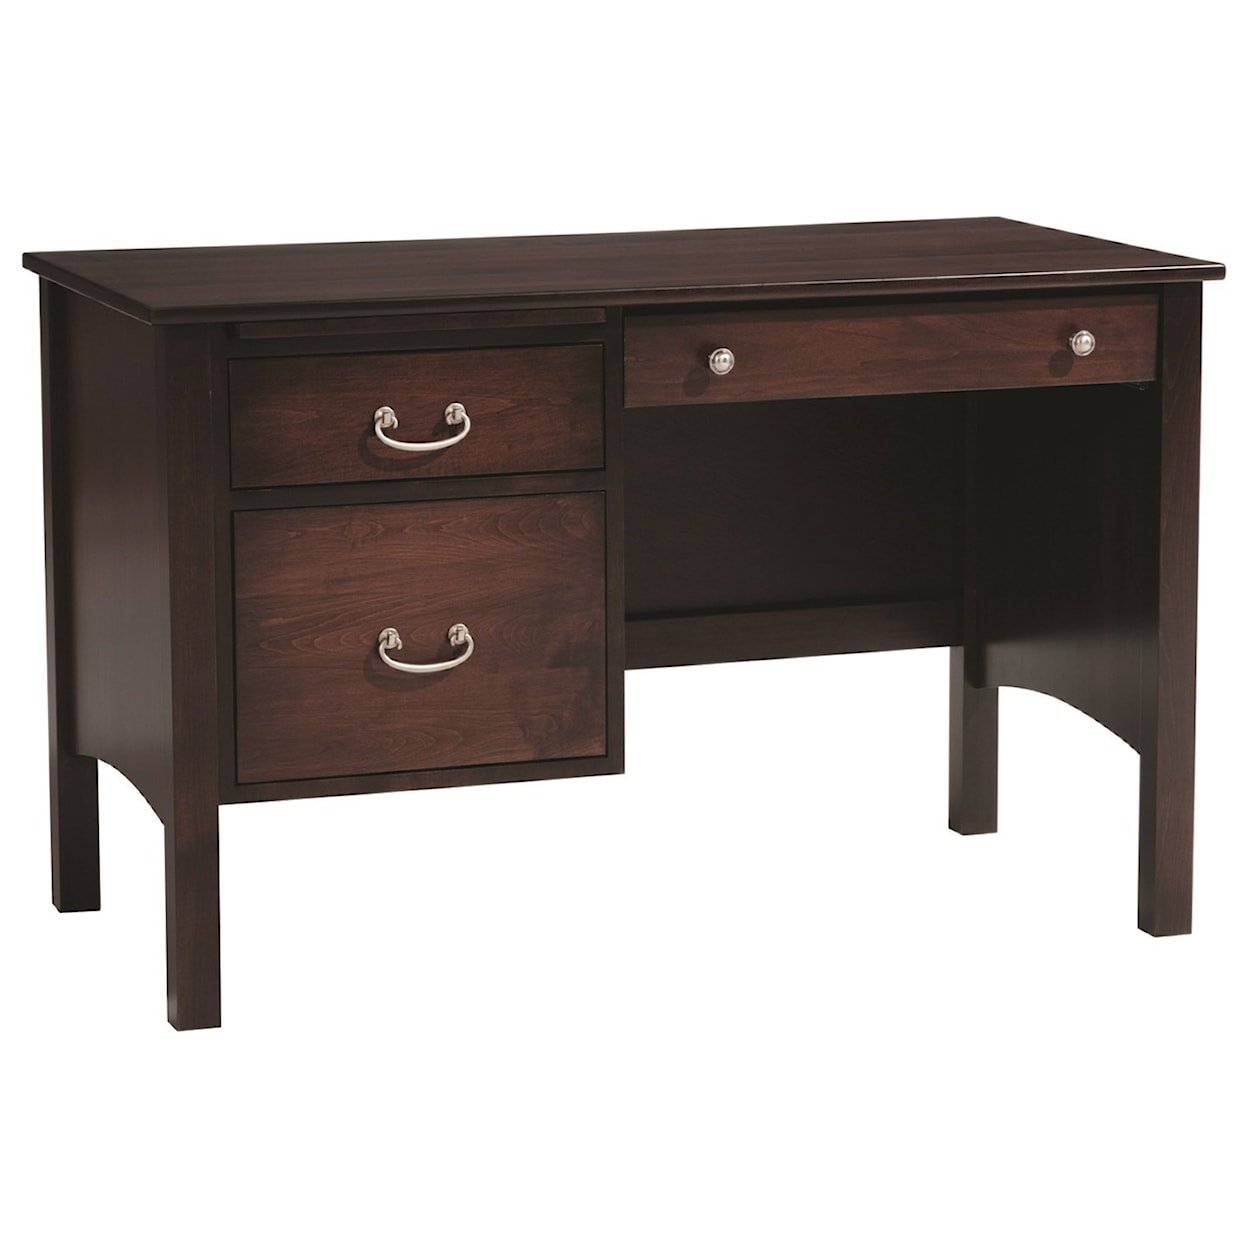 Y & T Woodcraft Rivertown Home Office Desk with Two Dovetail Drawers